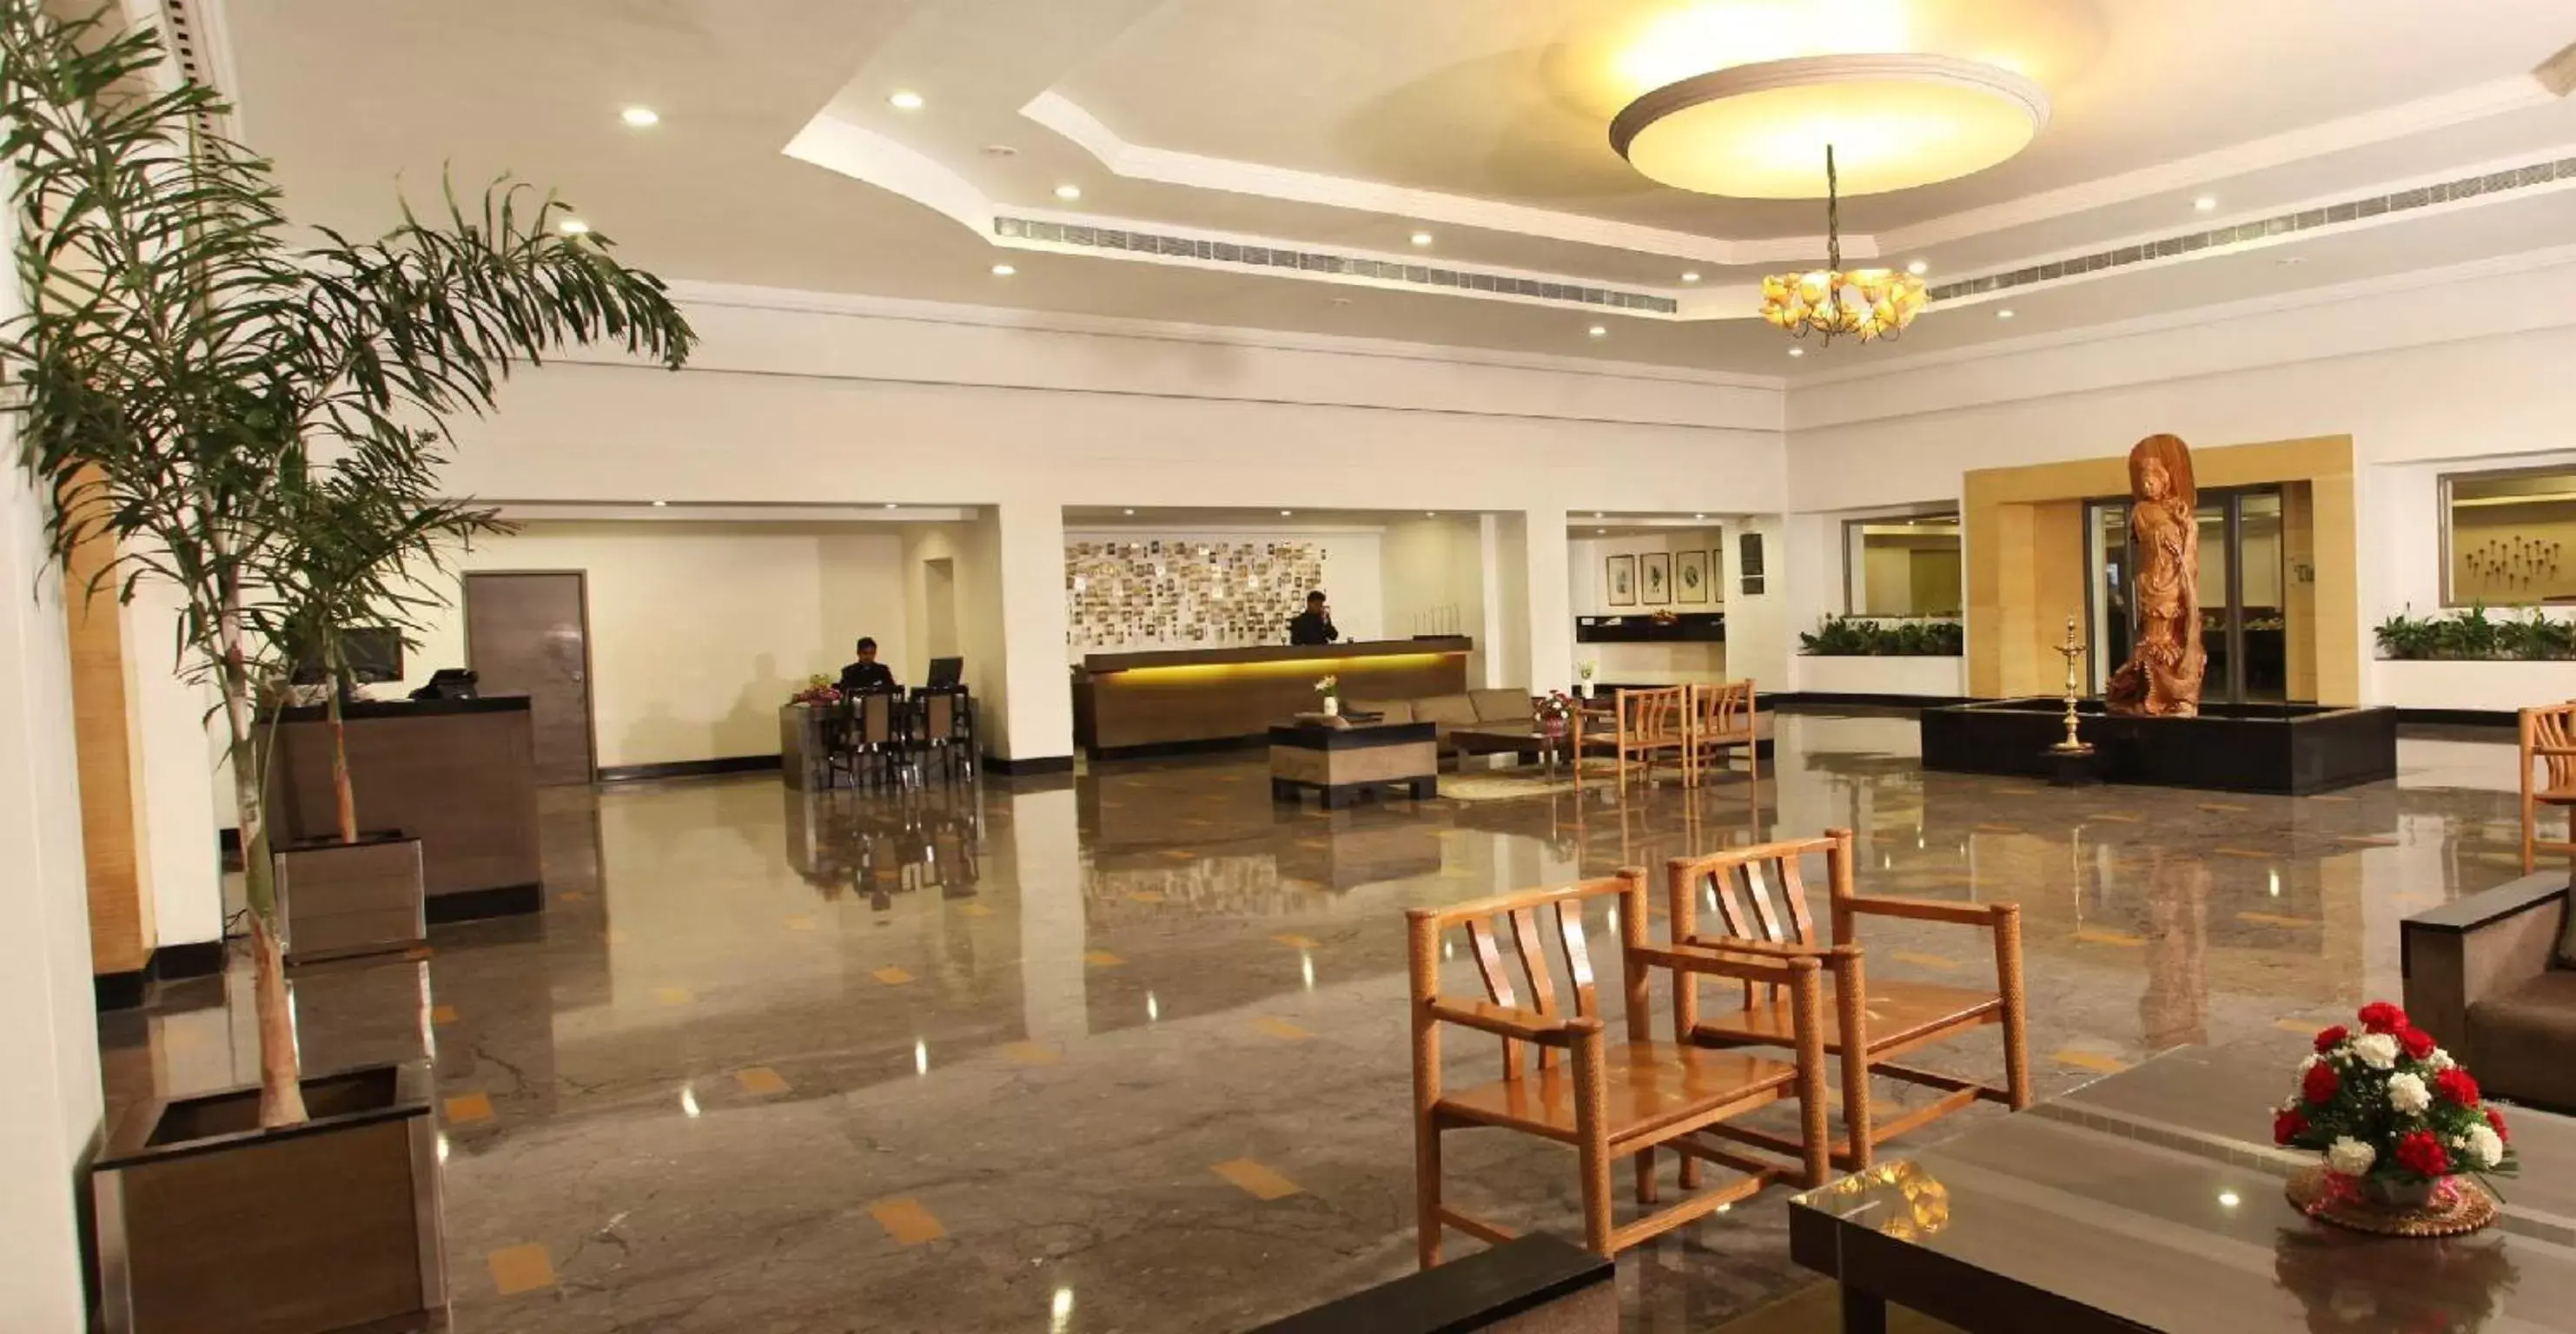 Lobby or reception in Green Park, Visakhapatnam